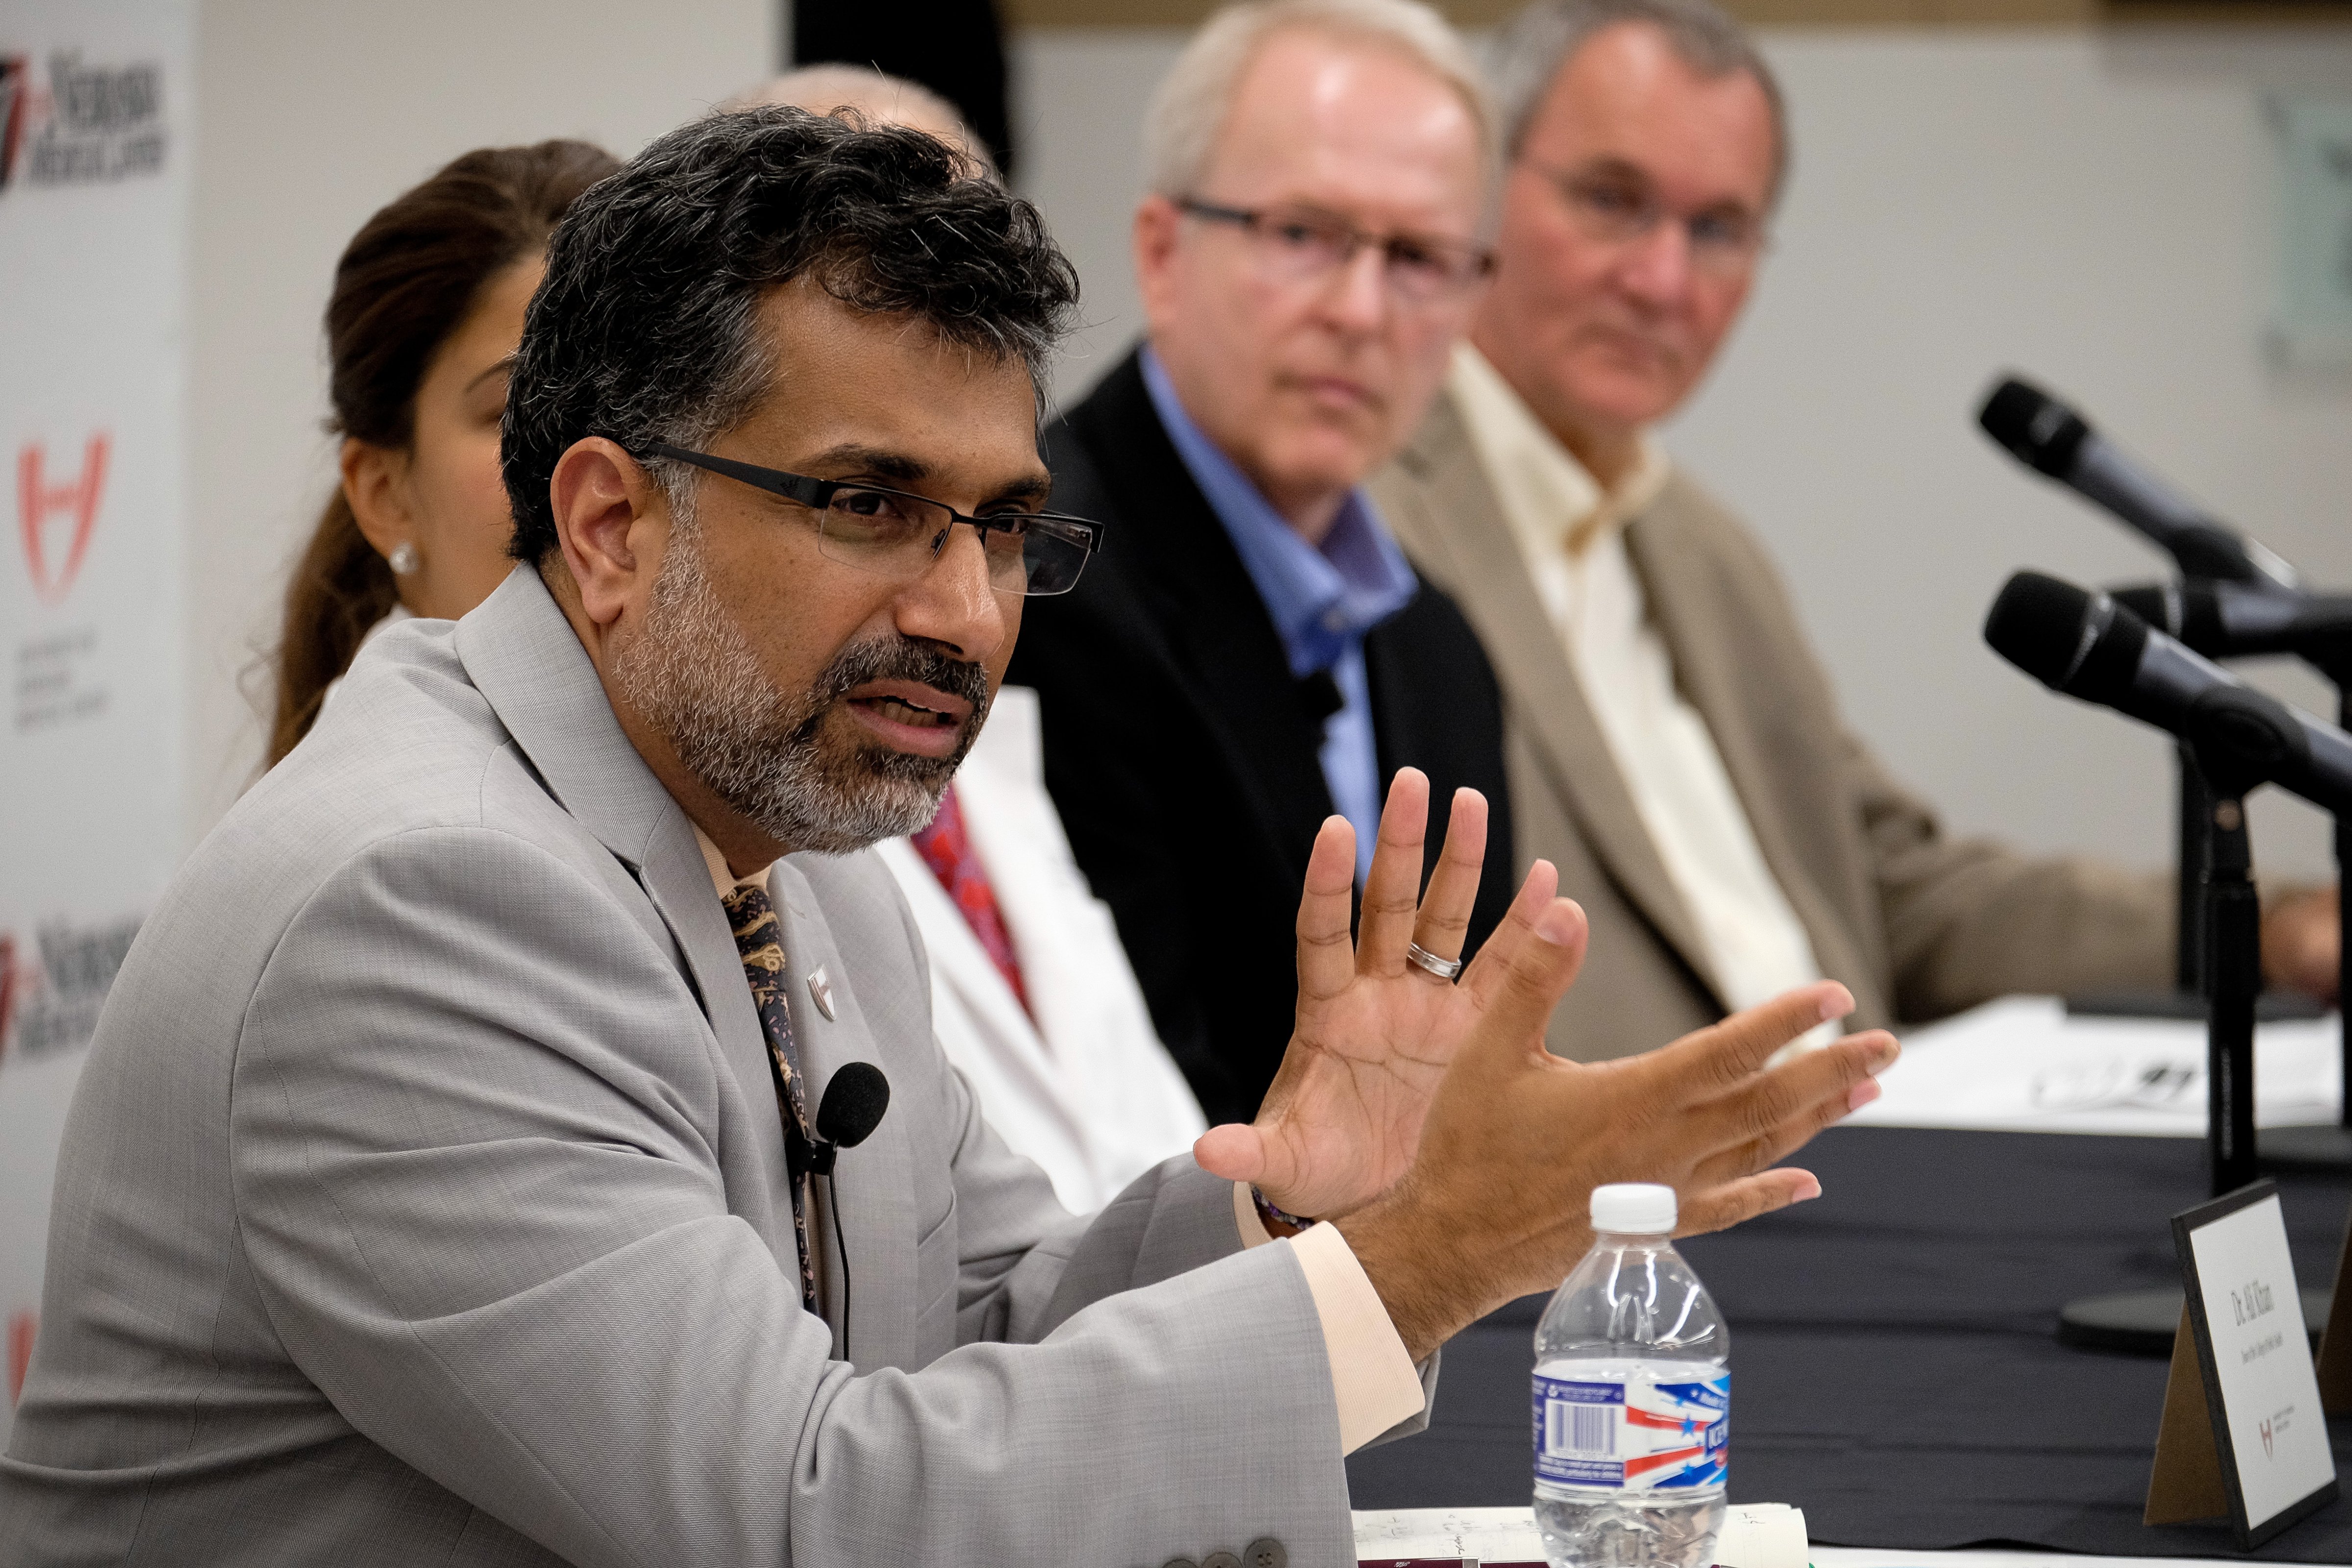 Ali S. Khan M.D. speaks to members of the media at the University of Nebraska Medical Center about the arrival of ebola patient Rick Sacra. (Eric Francis&mdash;Getty Images)